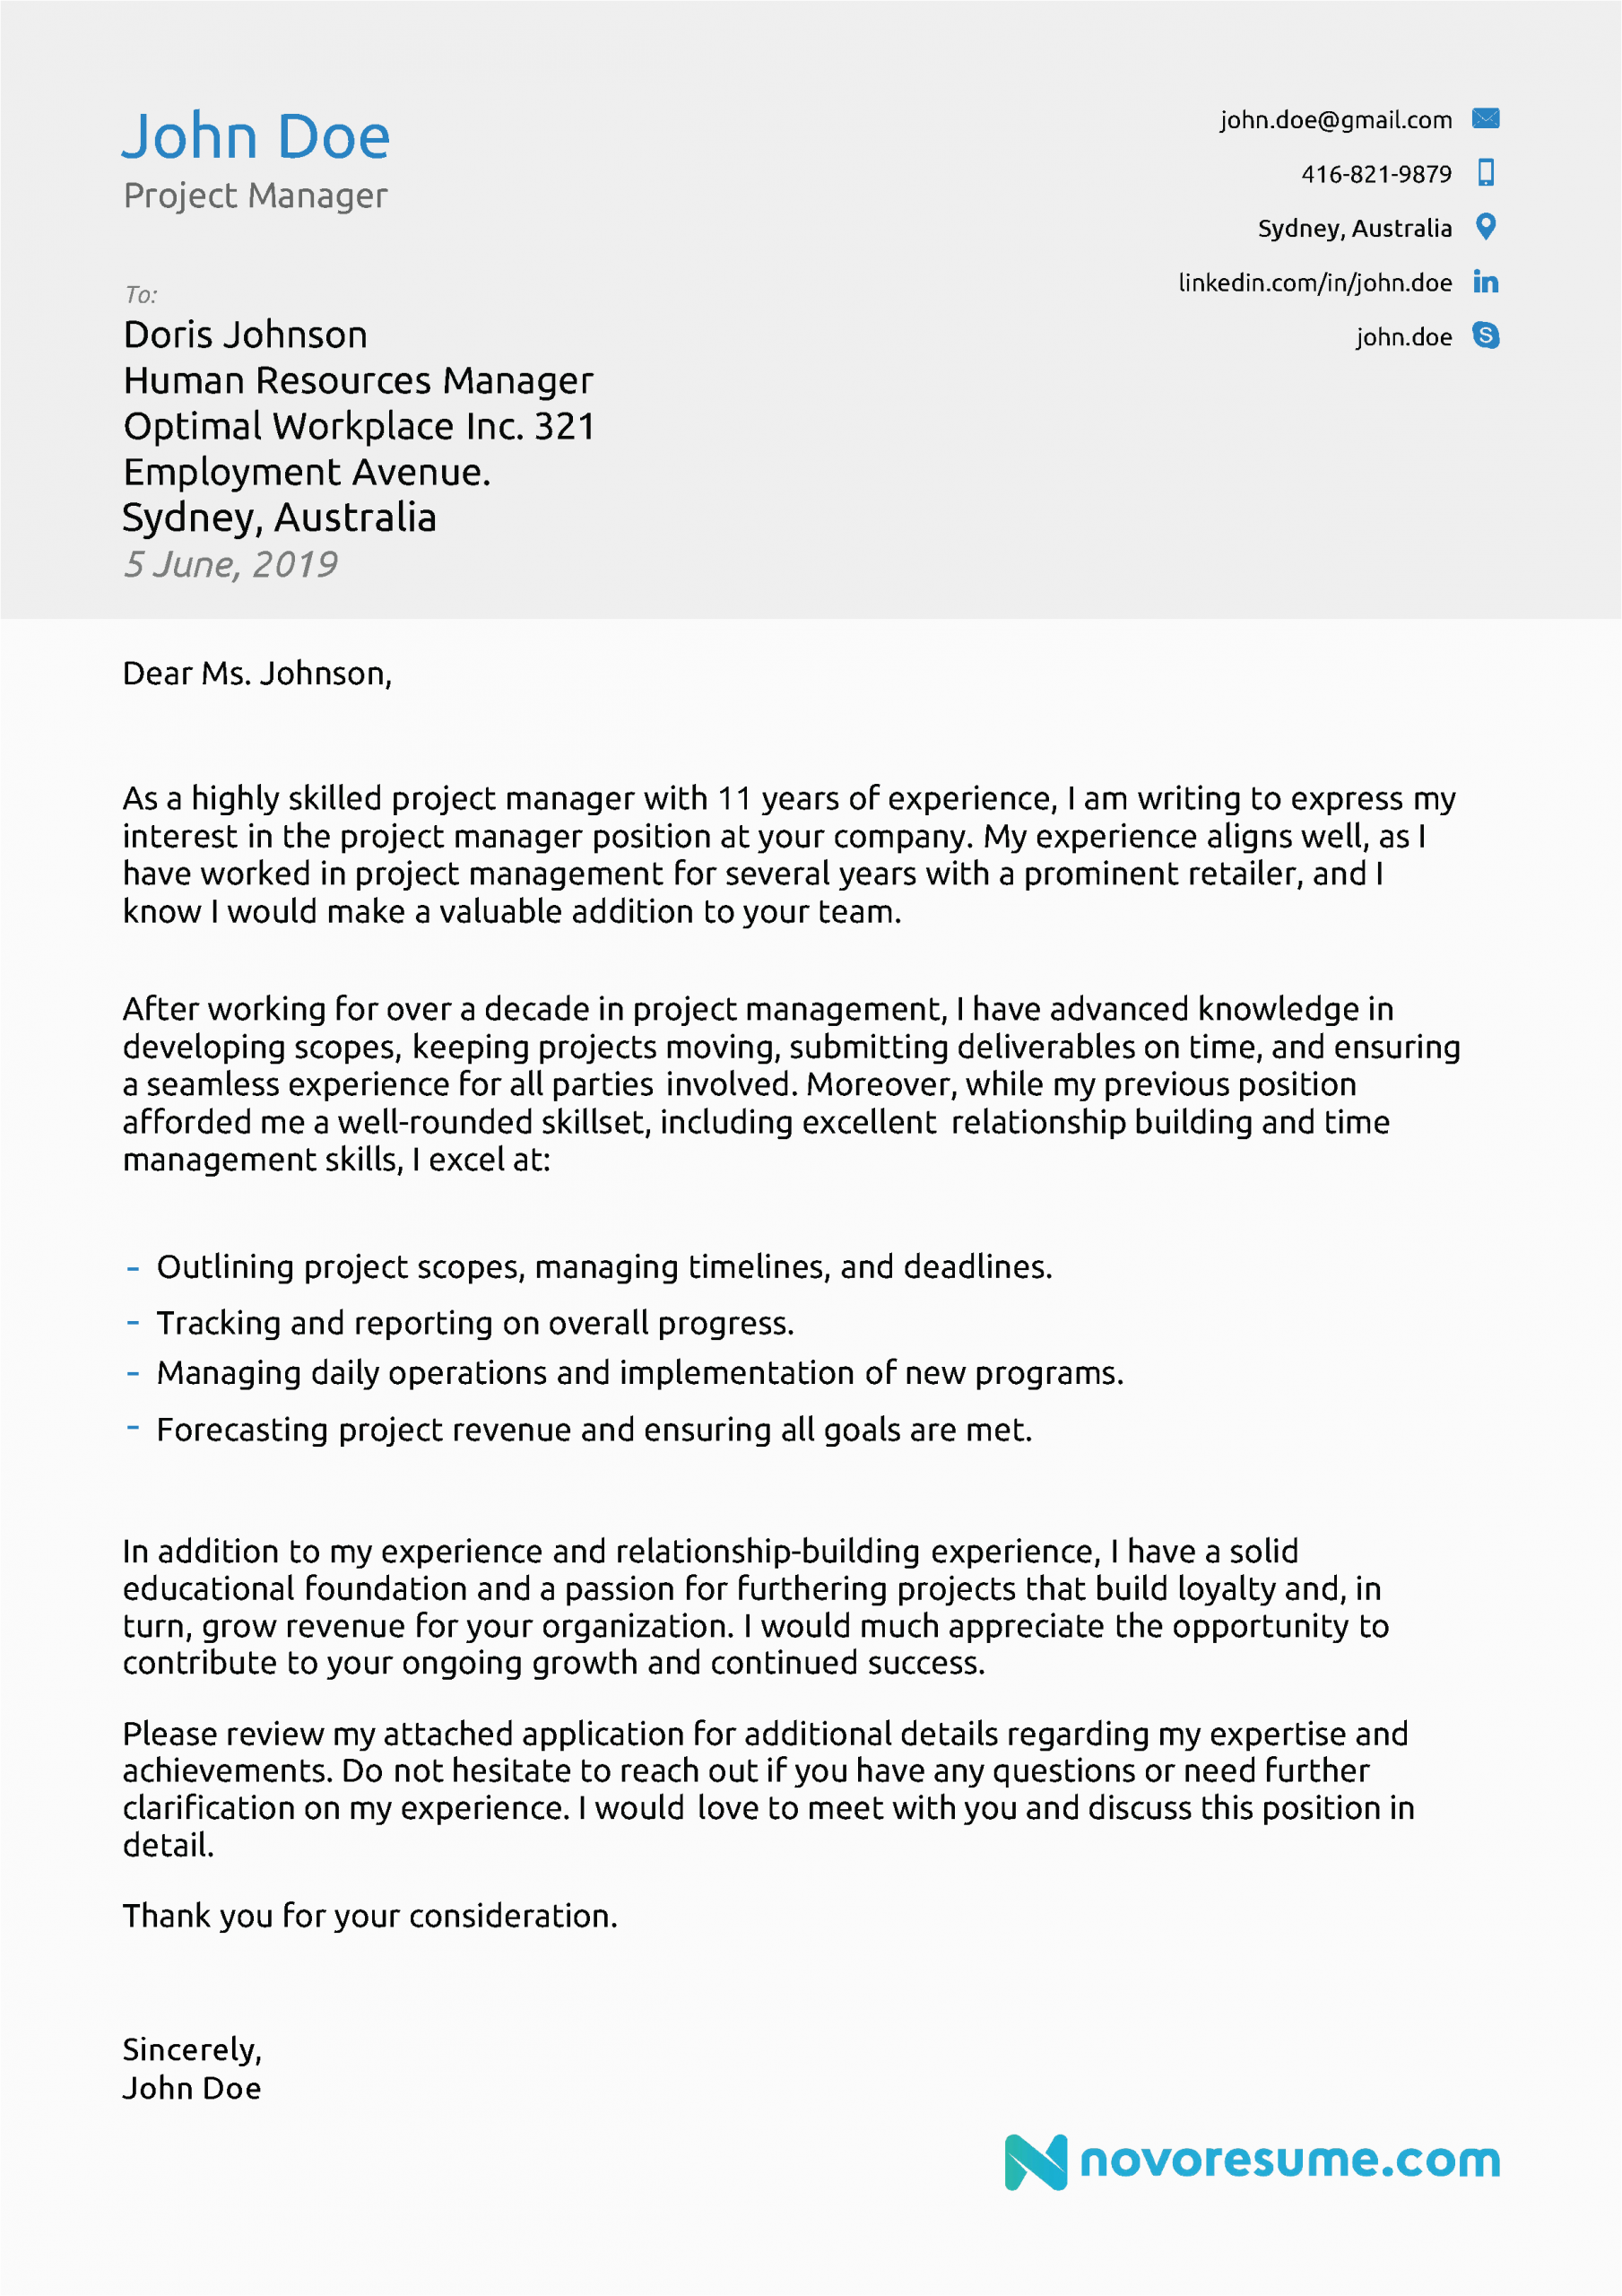 Sample Cover Letter for Resume 2019 top Cover Letter Examples In 2020 [for All Professions]